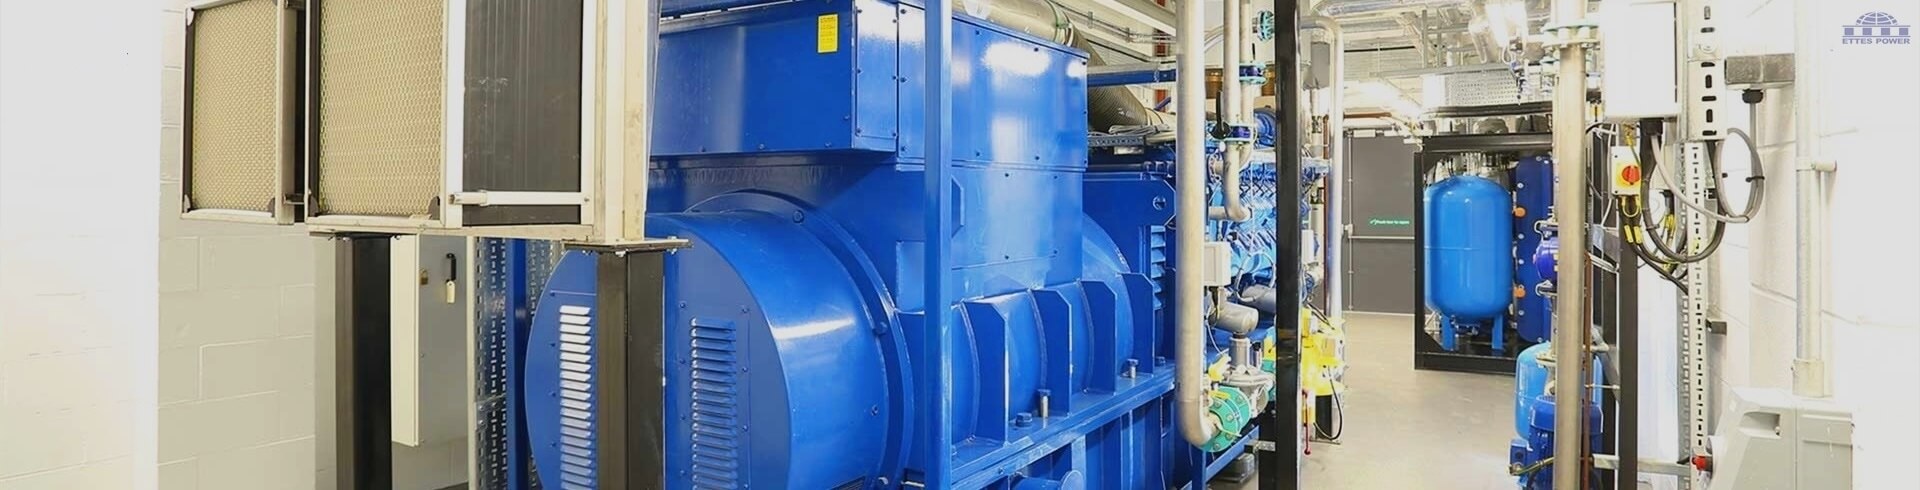 13-MWM 1000kW 1MW biogas engine generator combined heat and power CHP ETTES POWER